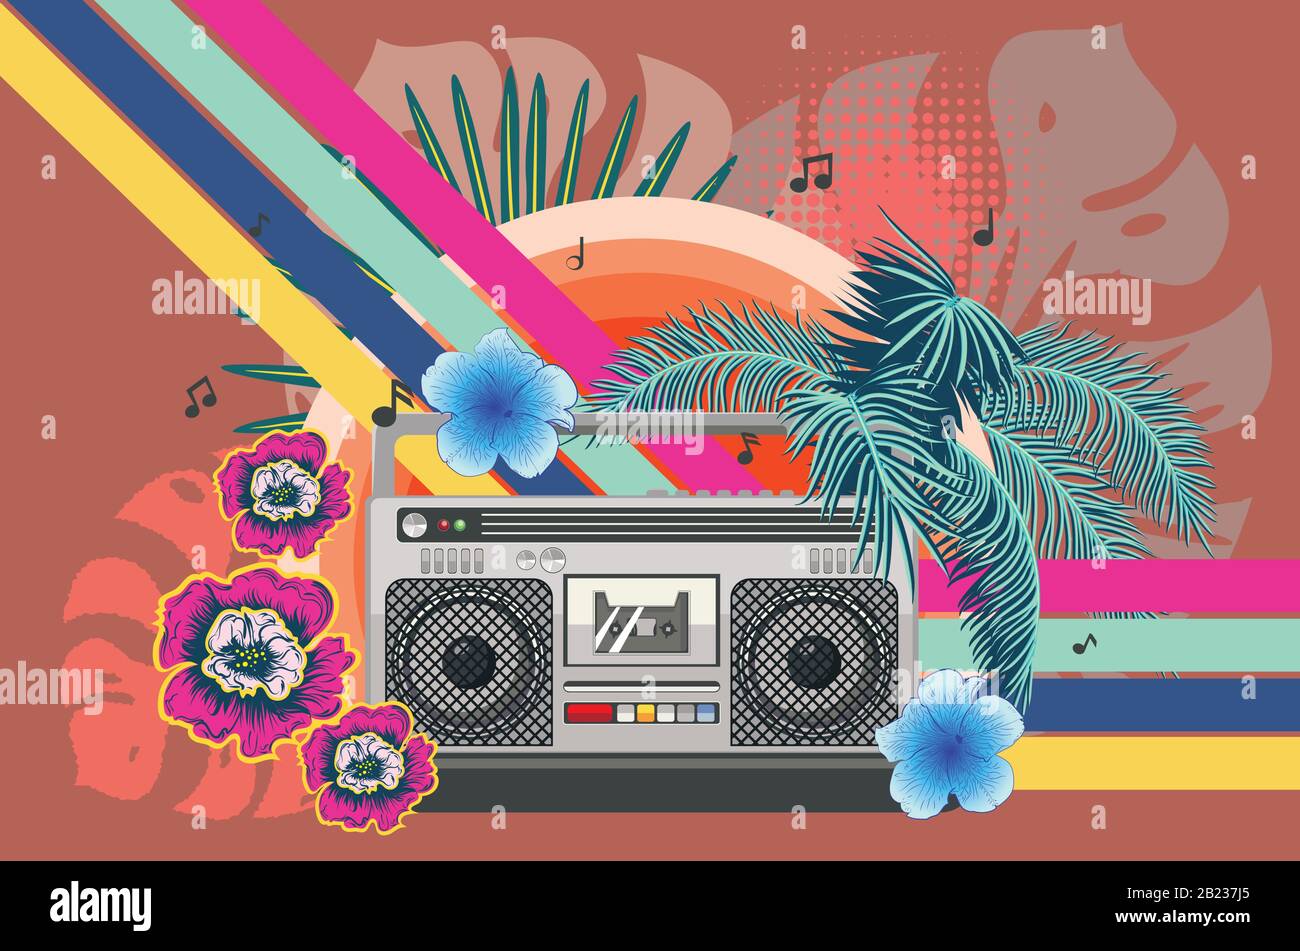 Retro 80s music poster with boombox and tropical leaves design. Stock Vector